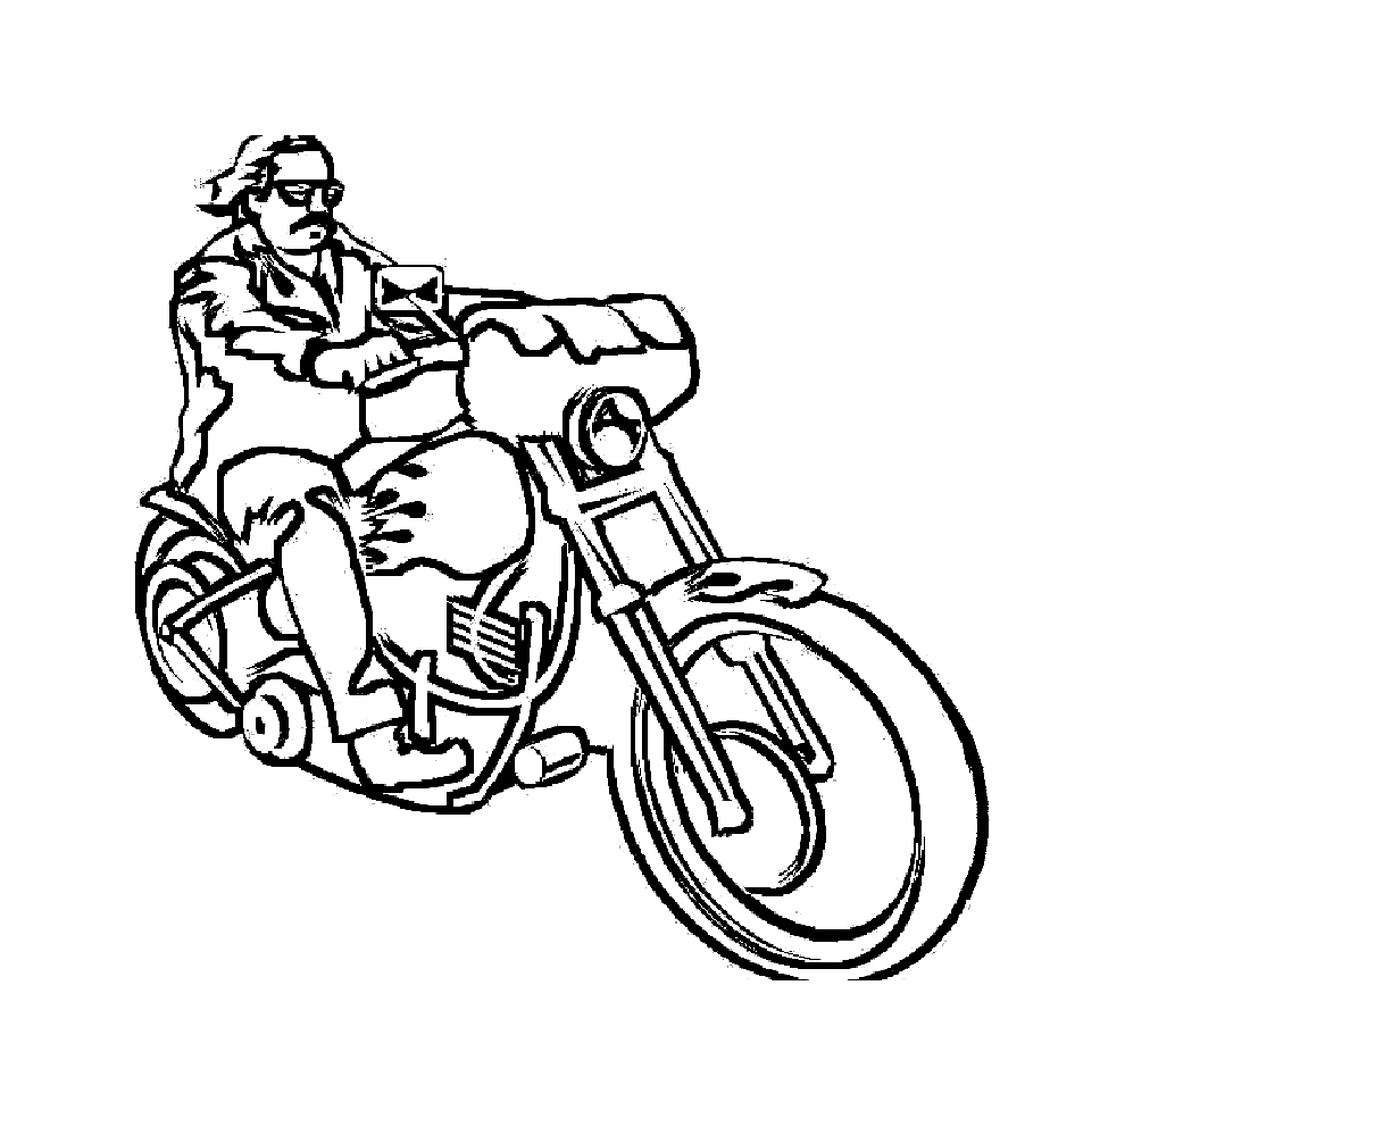  Woman sitting on a motorcycle 